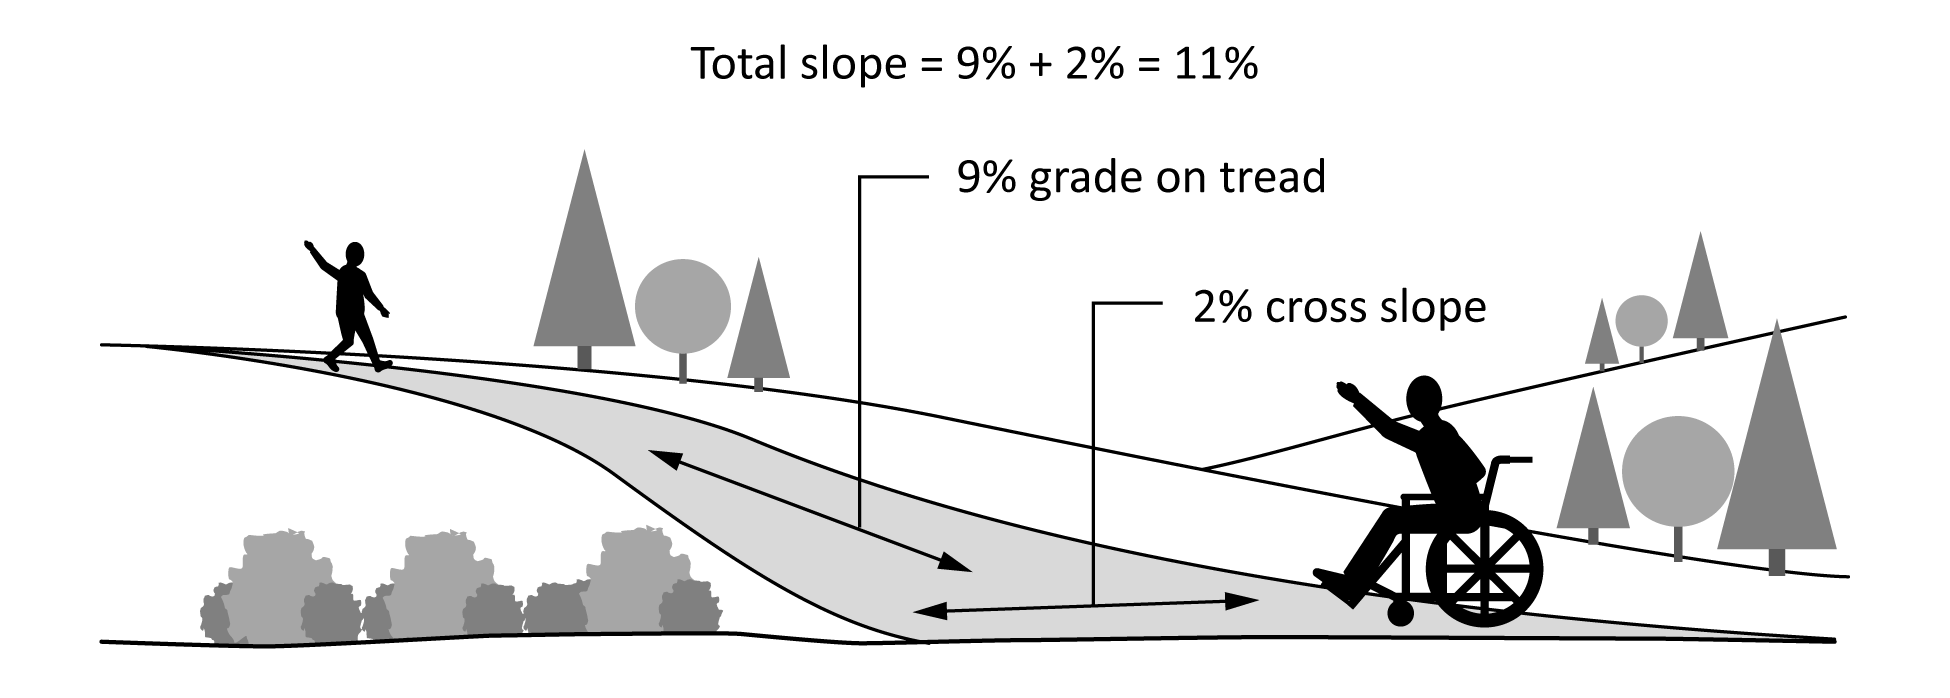 This figure shows an illustration of a surface with one person walking at one end and another person in a wheelchair at the other. The surface is labelled to show the 9% grade and the 2% cross slope, for a total slope of 11%. 